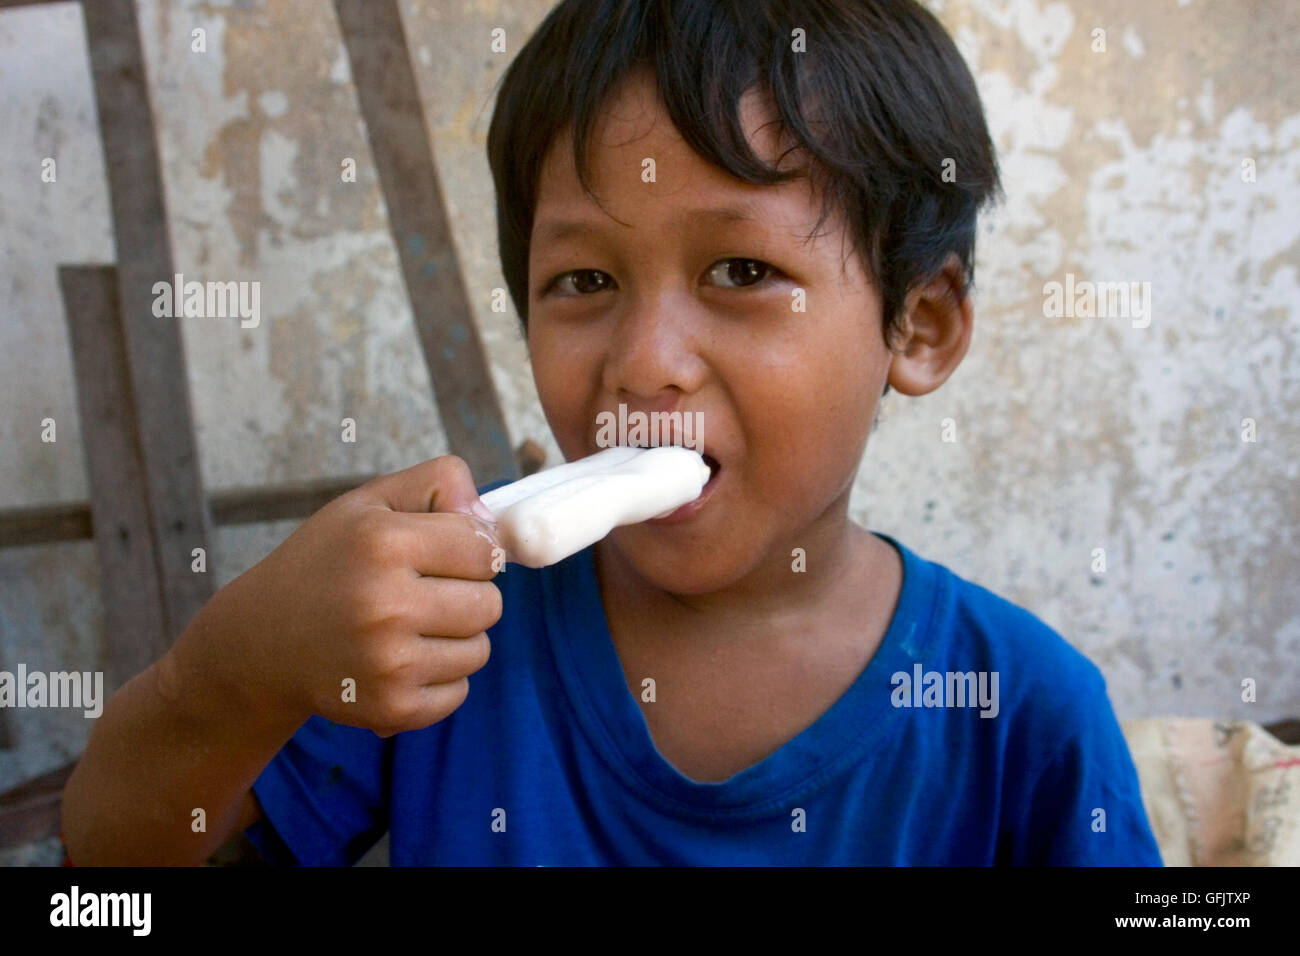 A young boy is eating an ice cream bar in a slum in Kampong Cham, Cambodia. Stock Photo